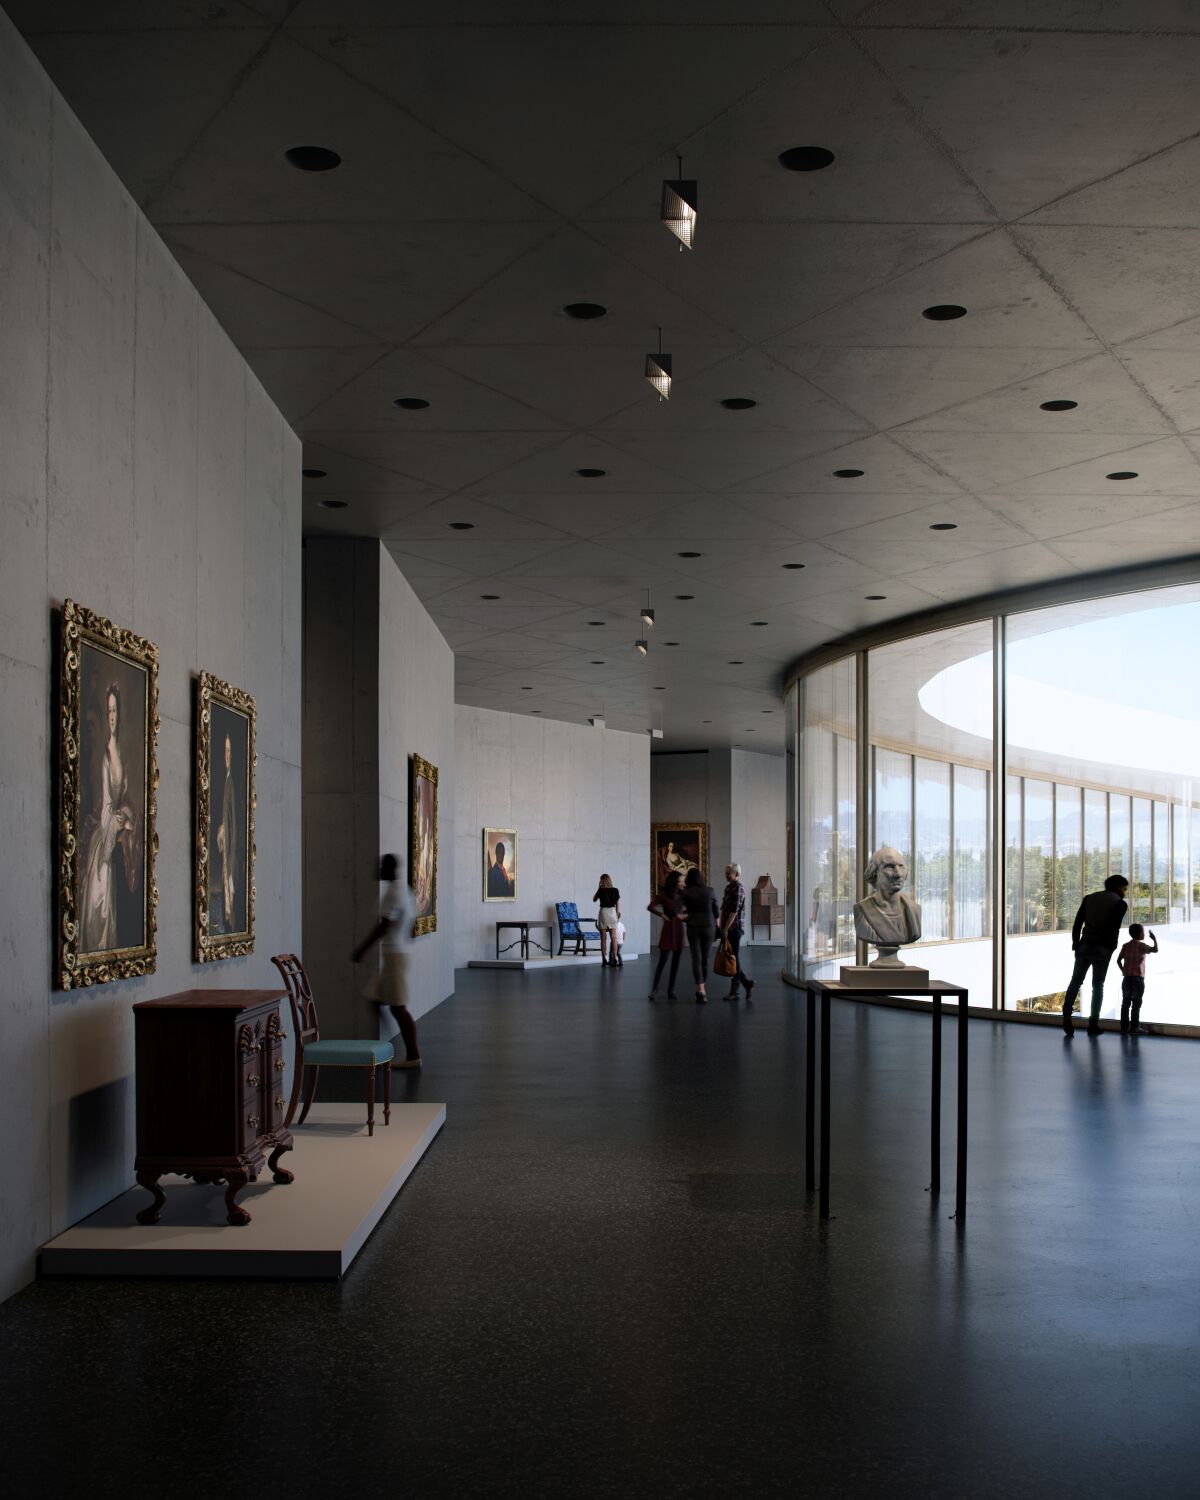 An architectural rendering shows a gallery with art and paintings on the left and curving windows on the right